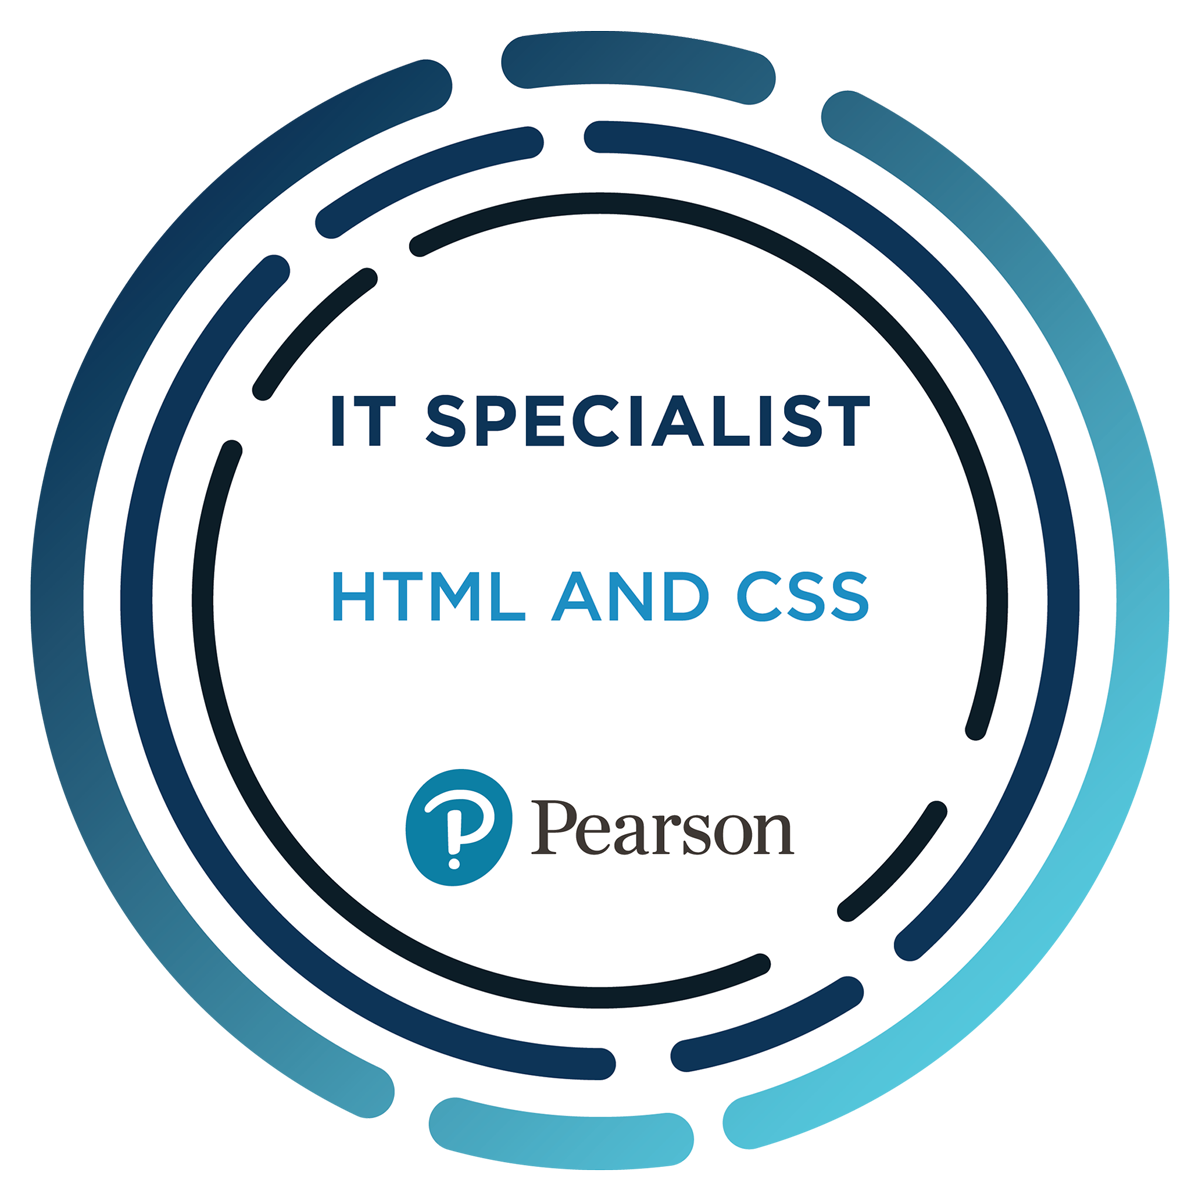 IT Specialist - HTML and CSS